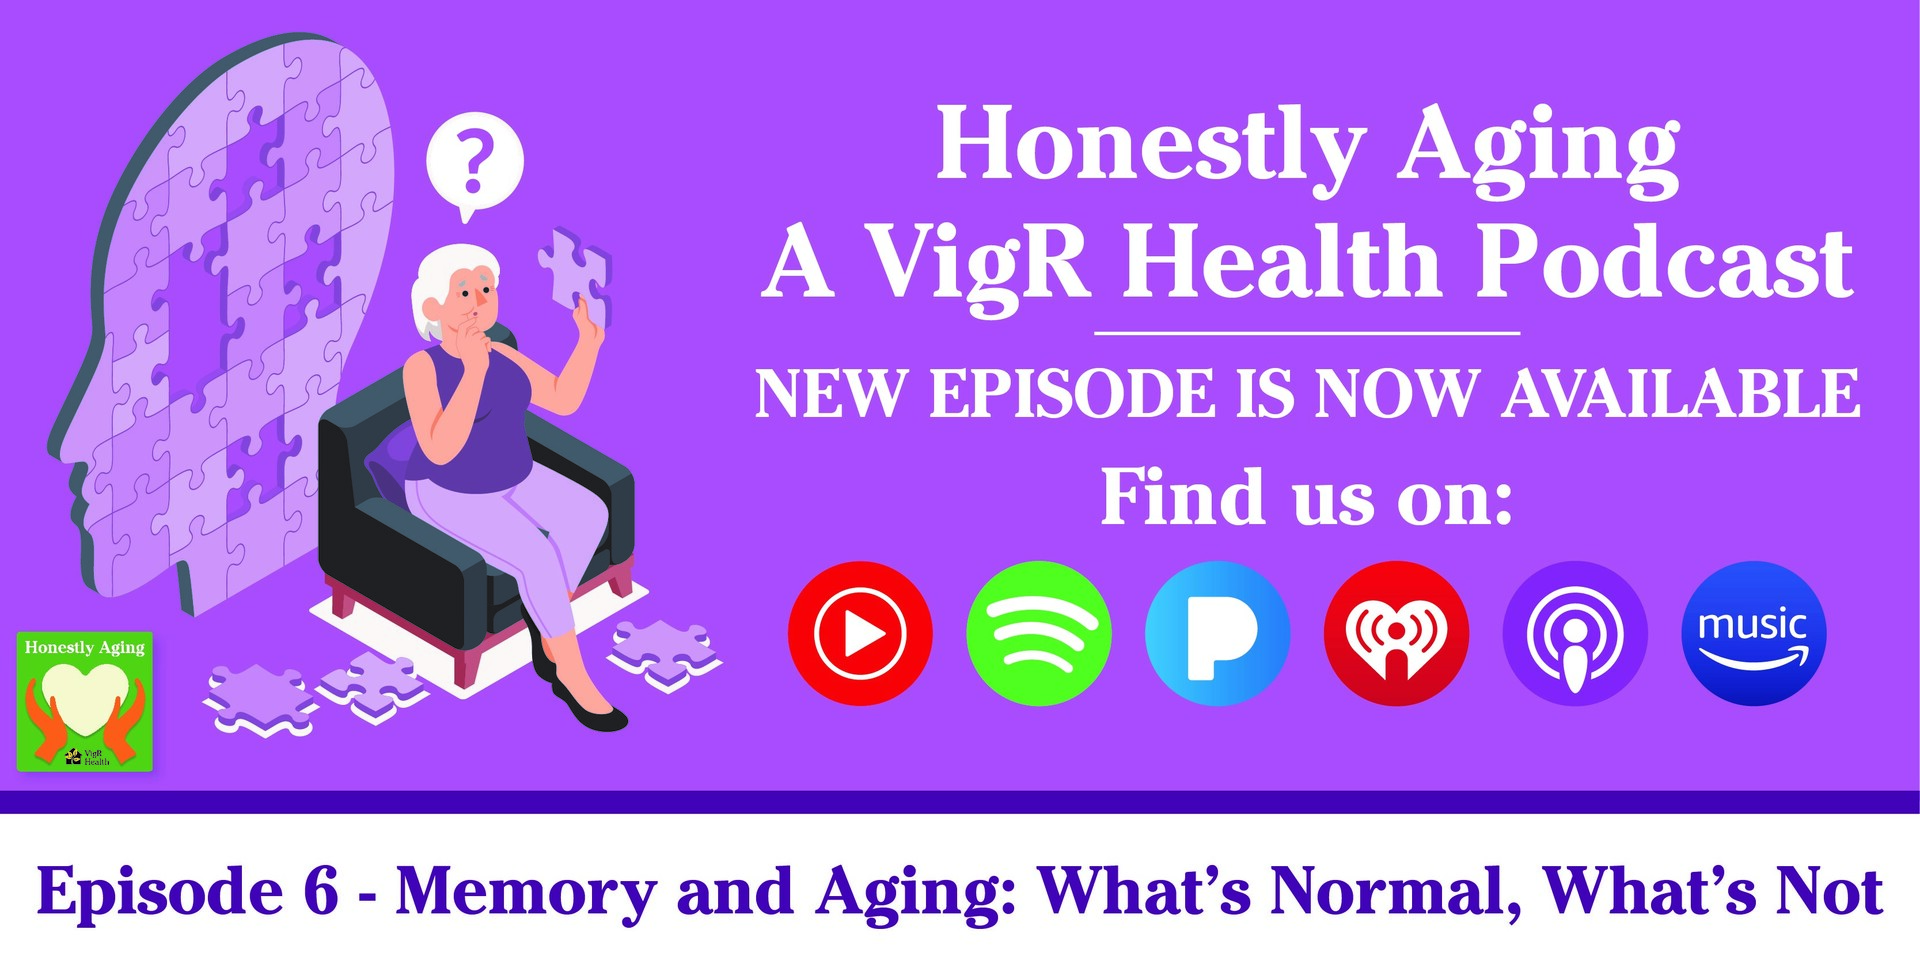 Memory and Aging - Another New Episode from Honestly Aging by VigR Health Podcast, Online Event